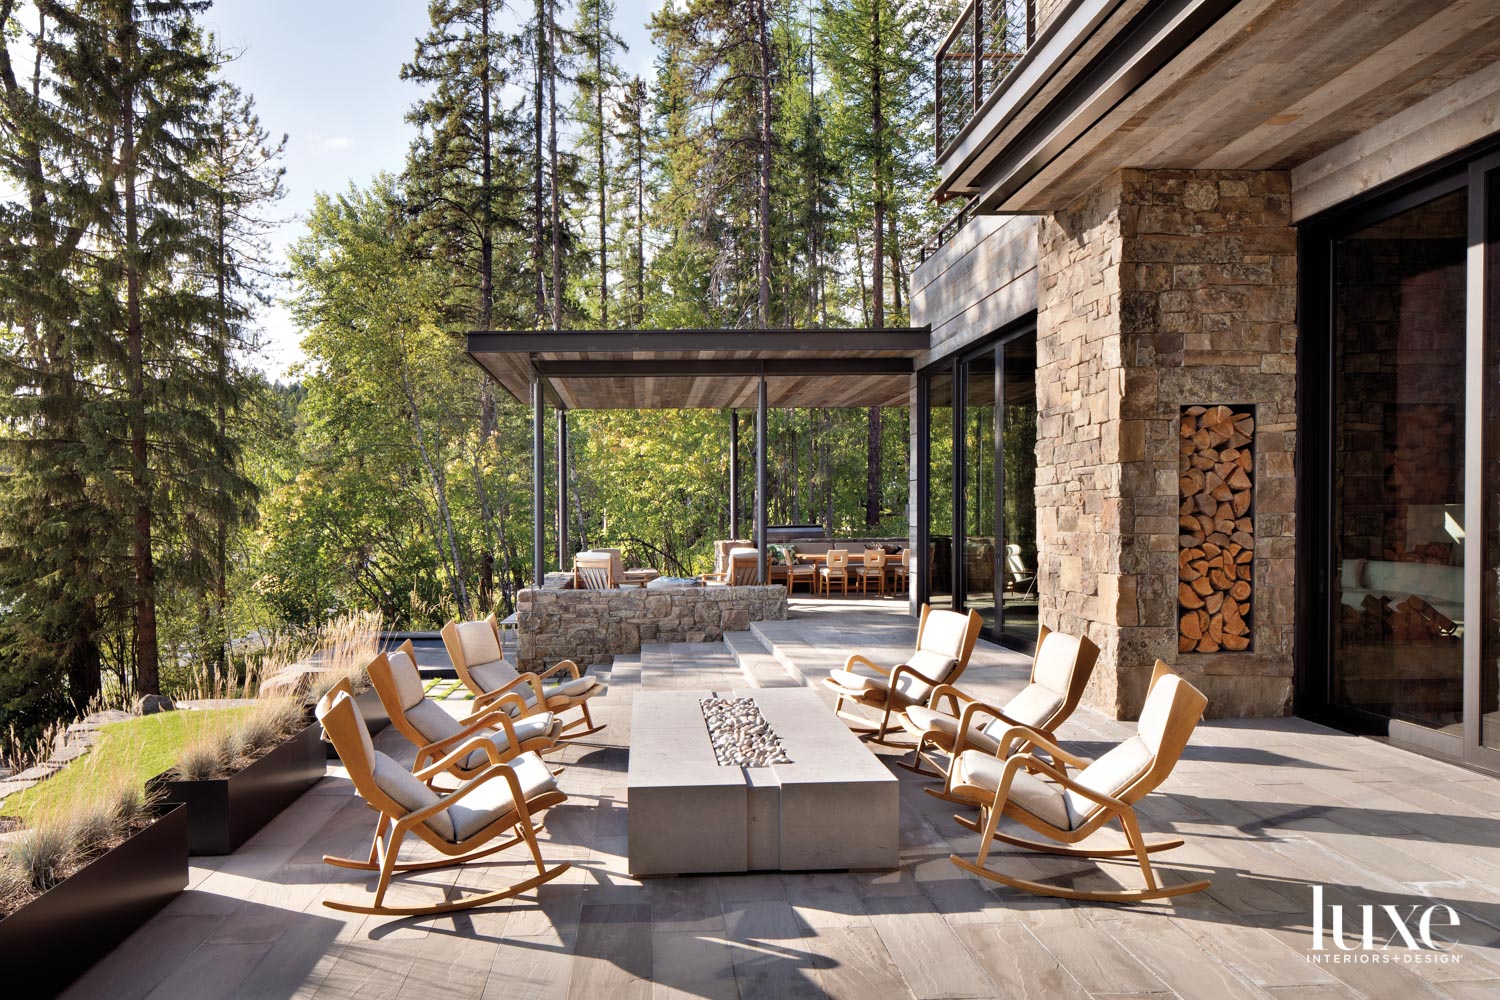 Exterior seating areas featuring rockers,...